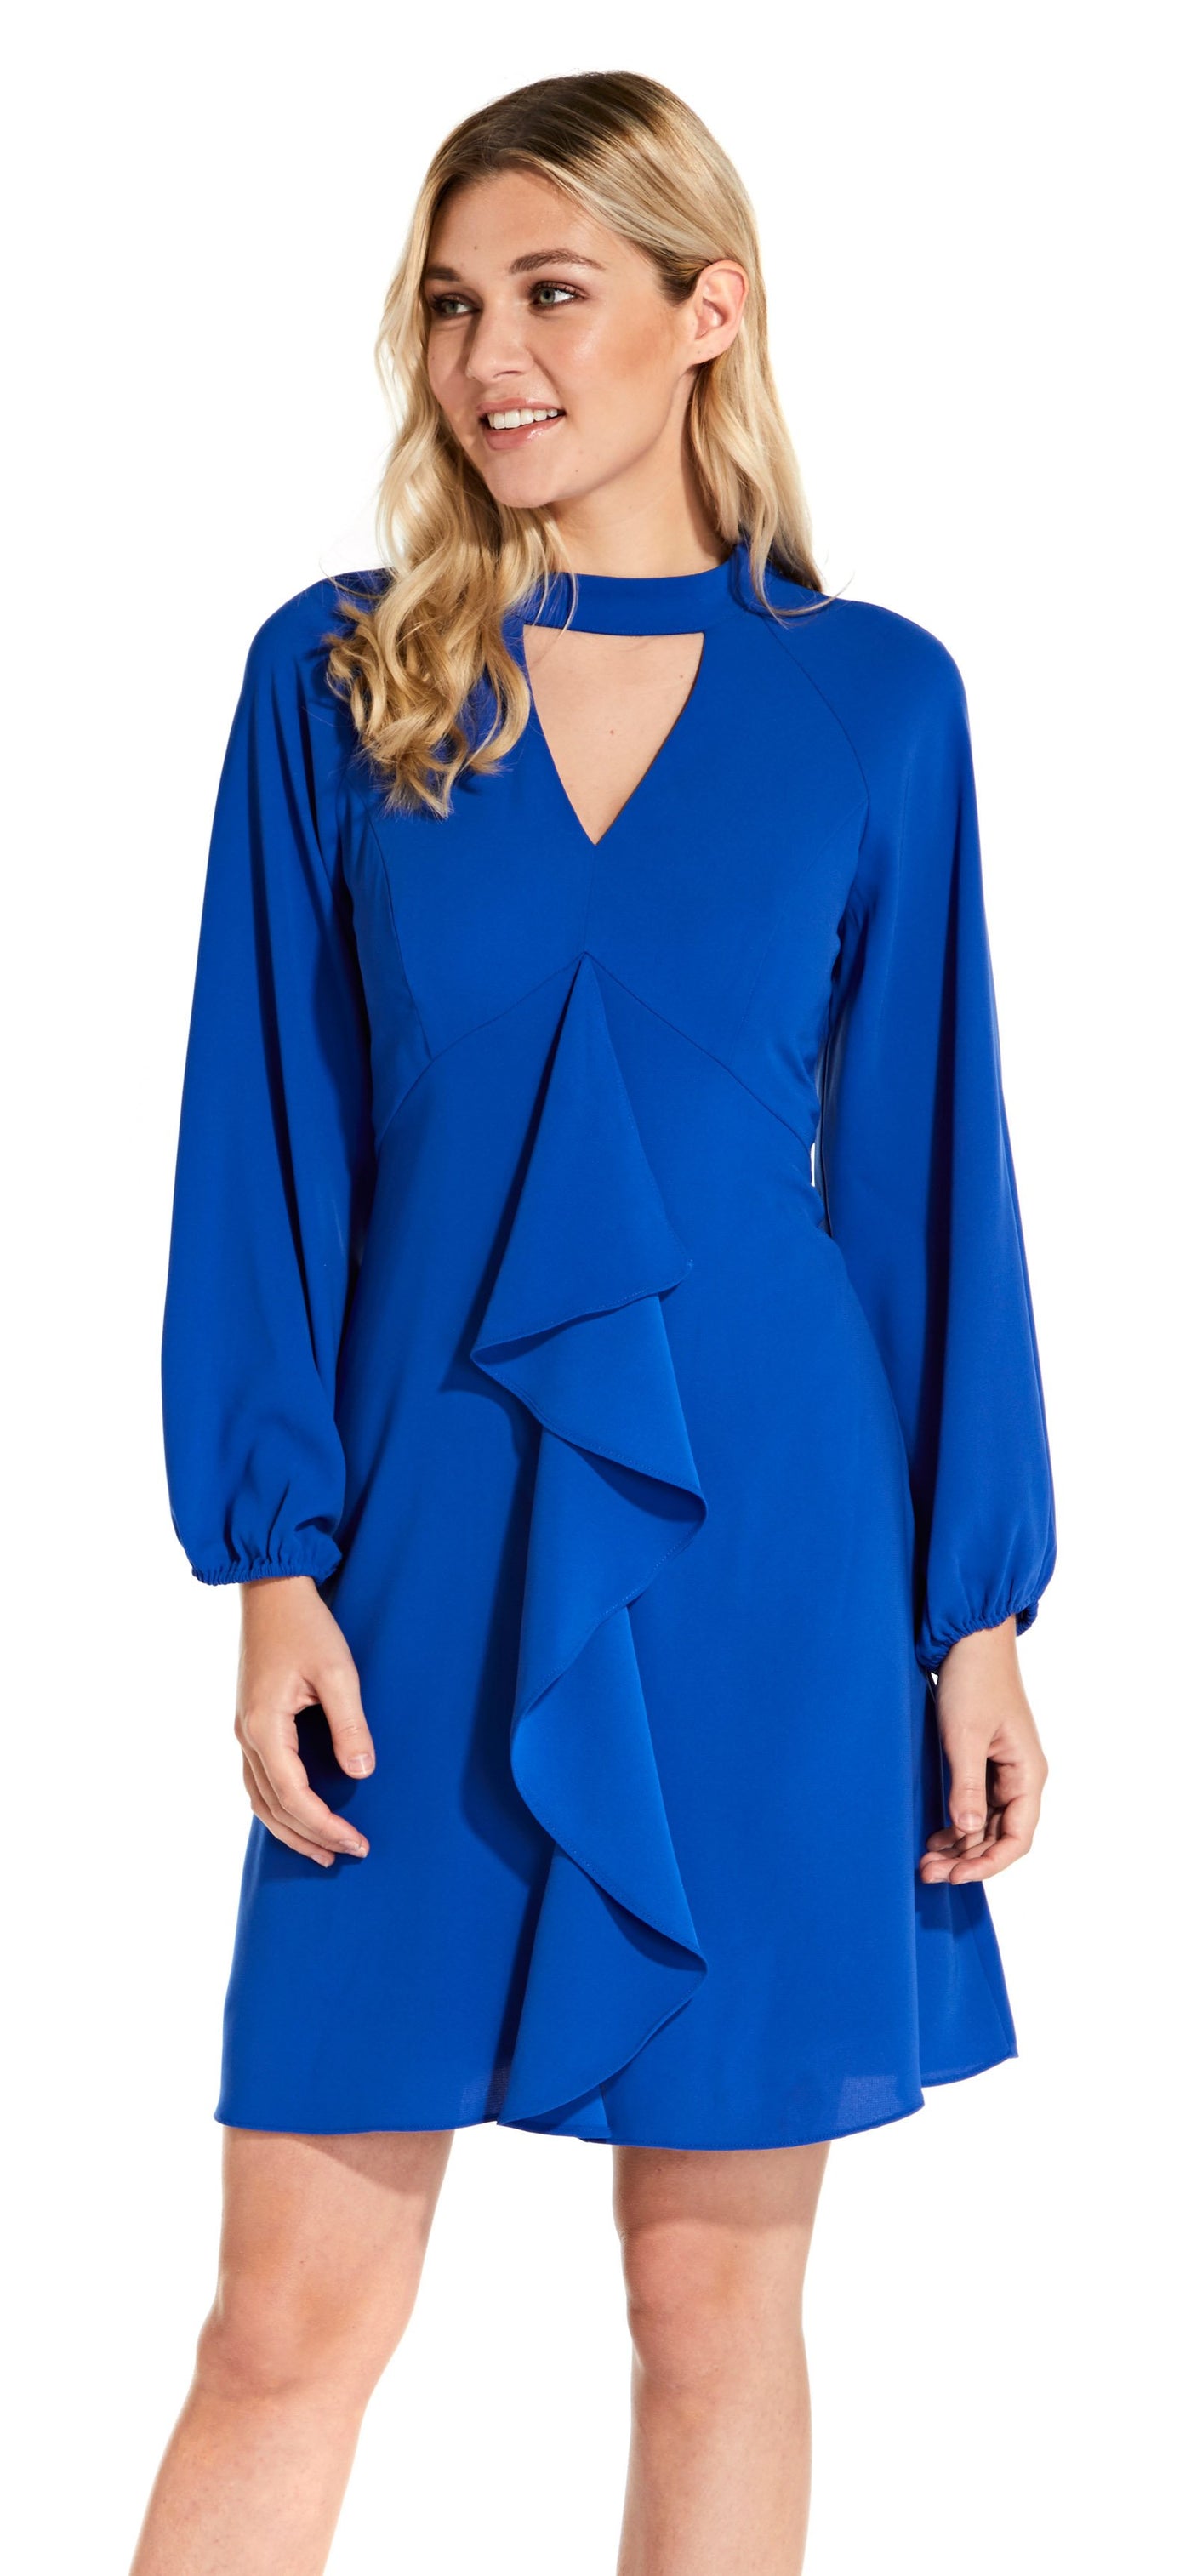 Adrianna Papell - AP1D103006 Ruffled Jewel Long Sleeves Cocktail Dress In Blue